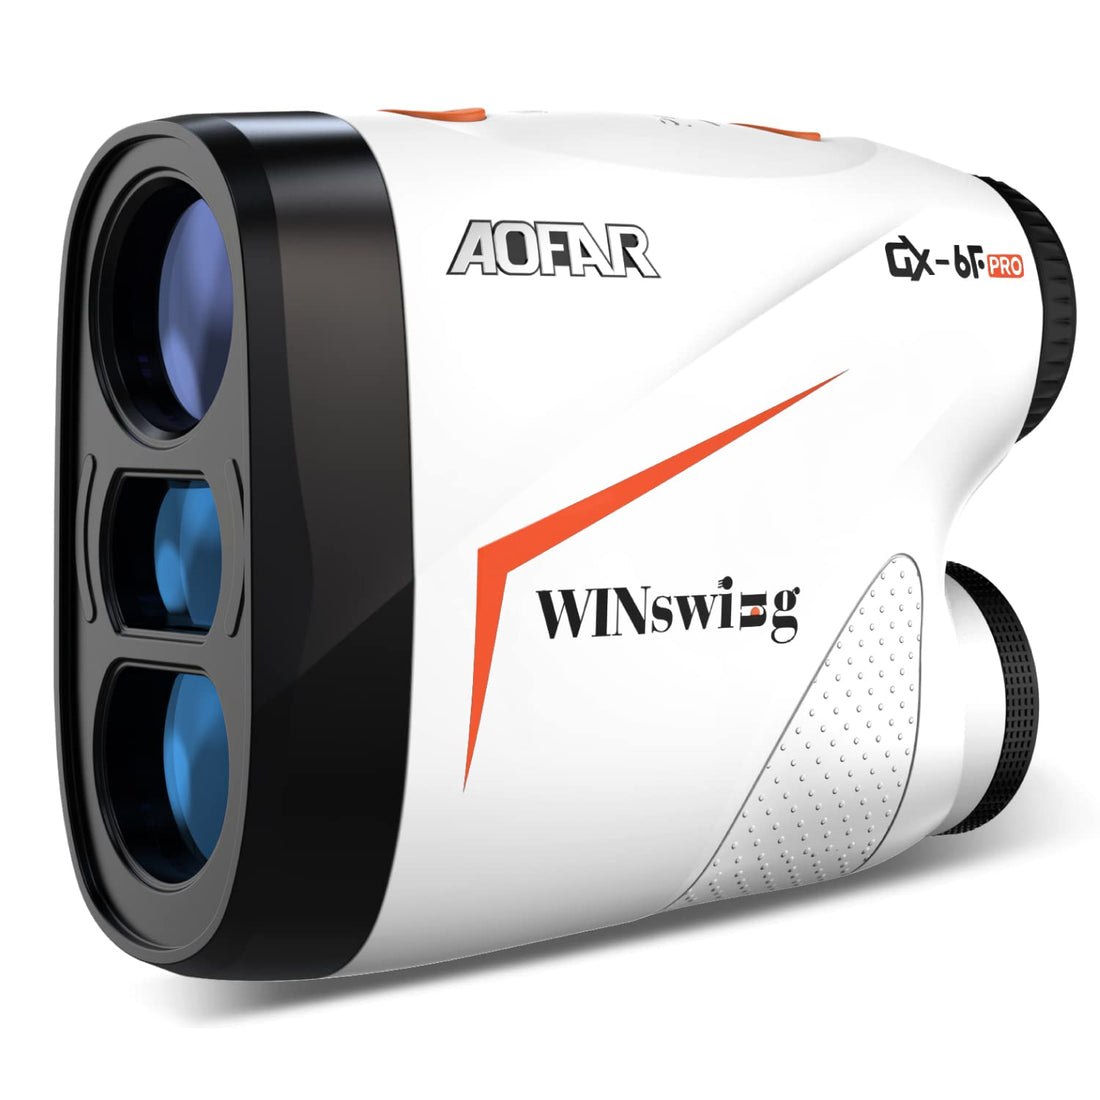 AOFAR Range Finder Golf GX-6F, Flag Lock with Pulse Vibration, Tournament Designed, 500 Yards RangeFinder for Distance Measuring with Continuous Scan, High-Precision Accurate Gift for Golfers